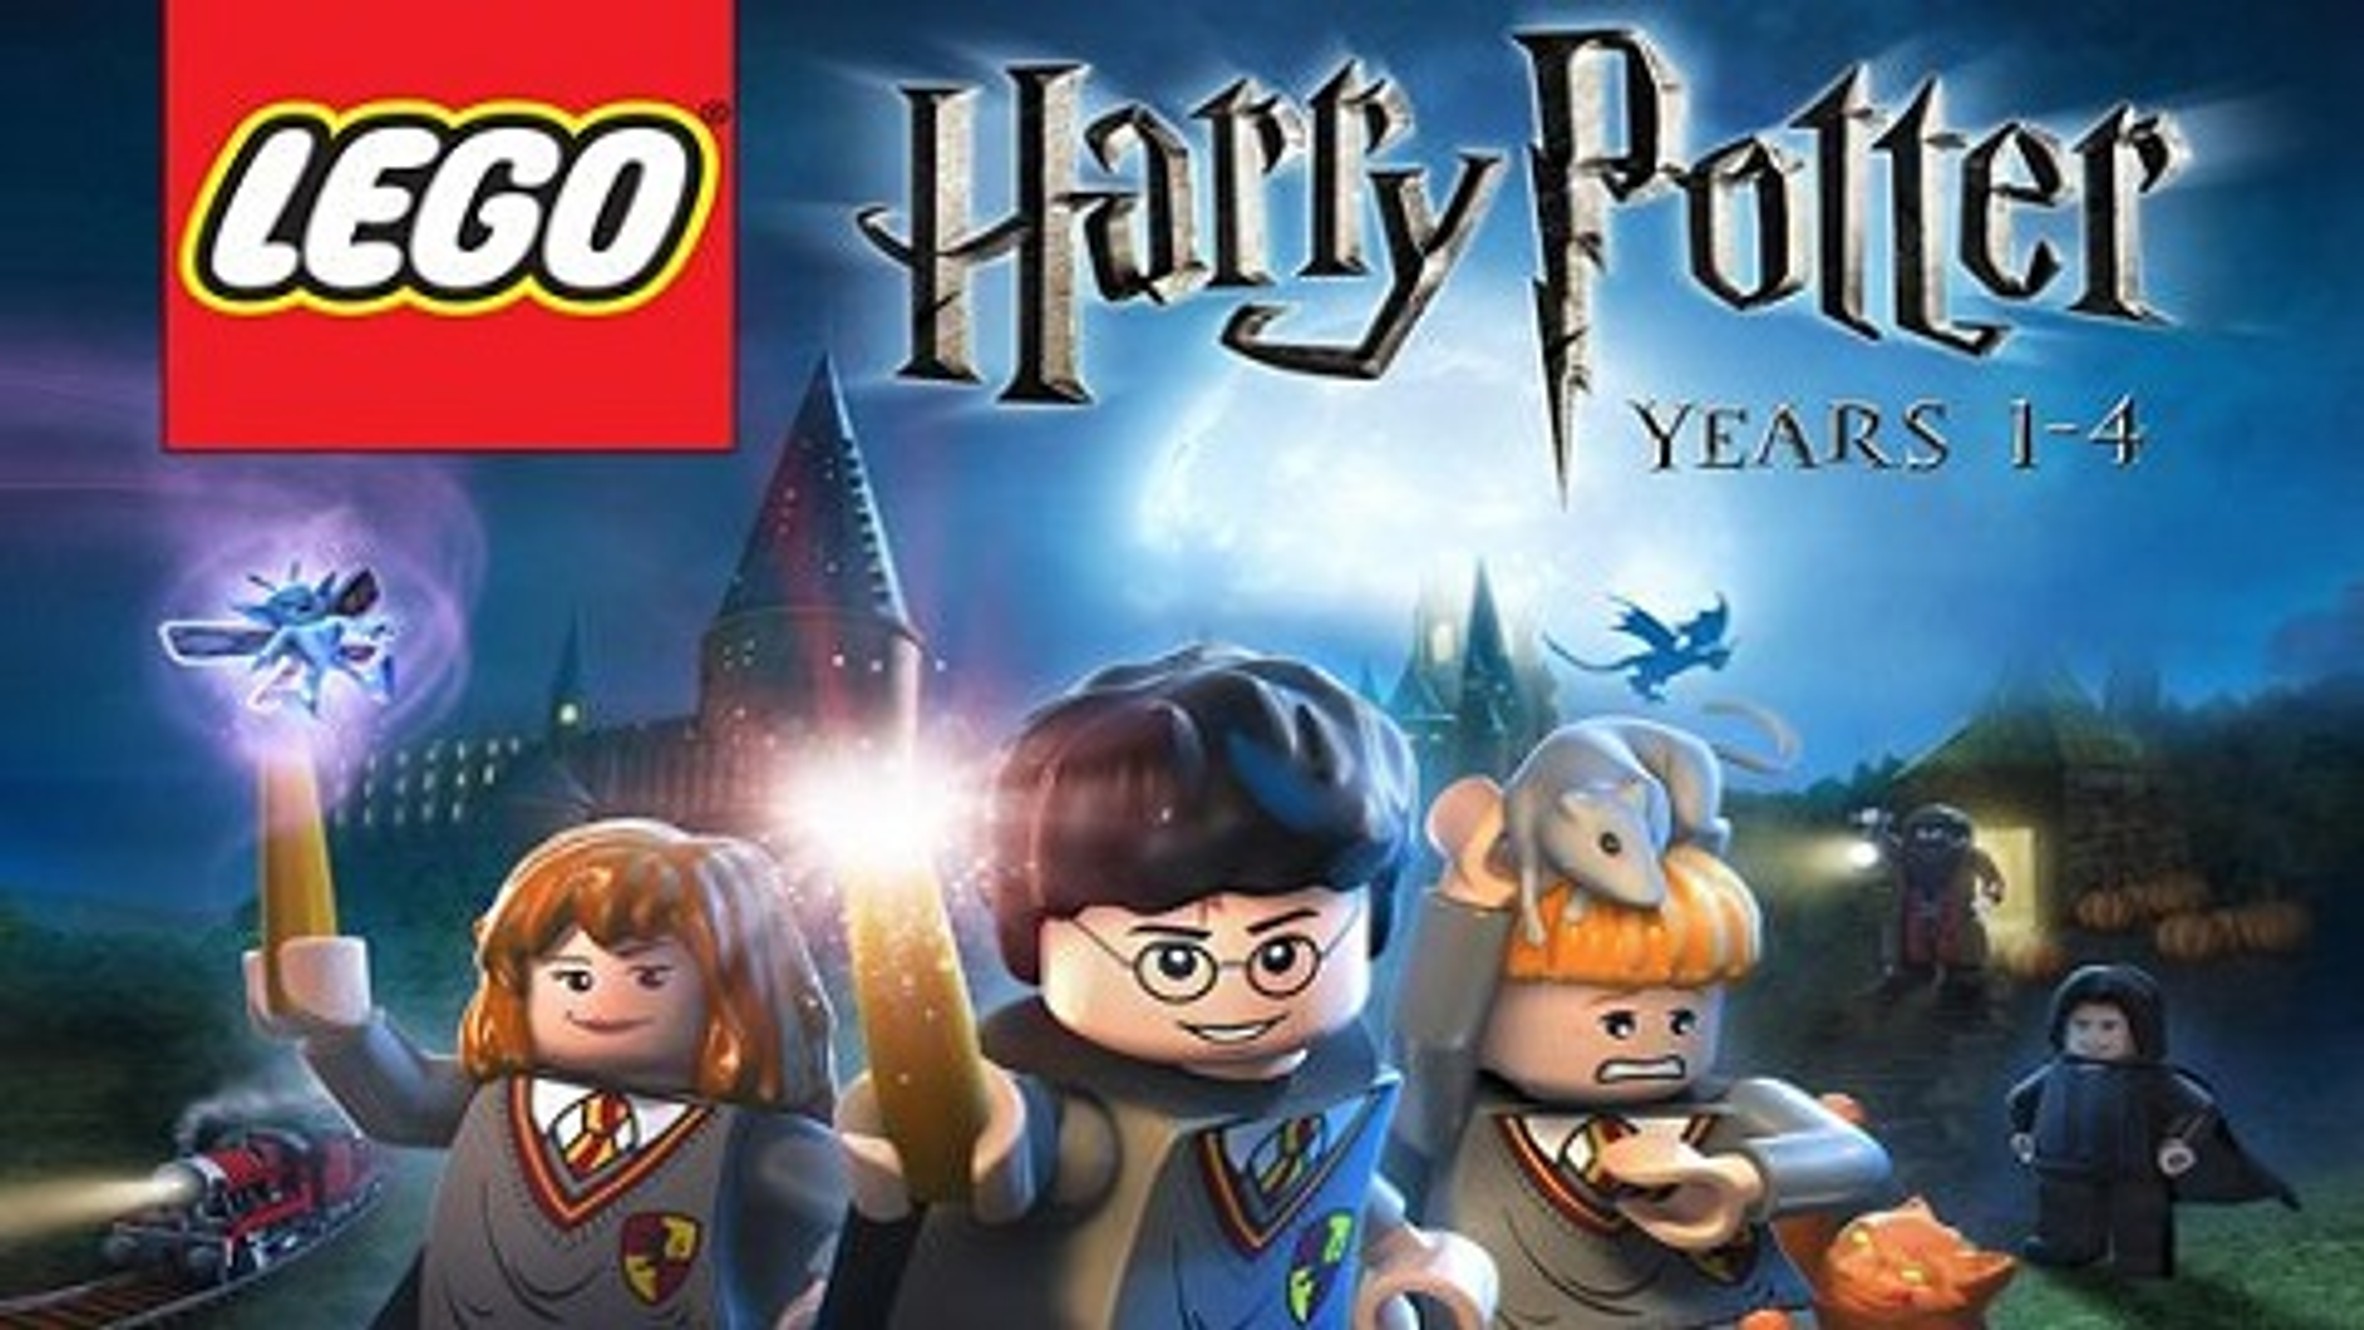 lego-harry-potter-years-1-4-free-download-latest-version-gaming-news